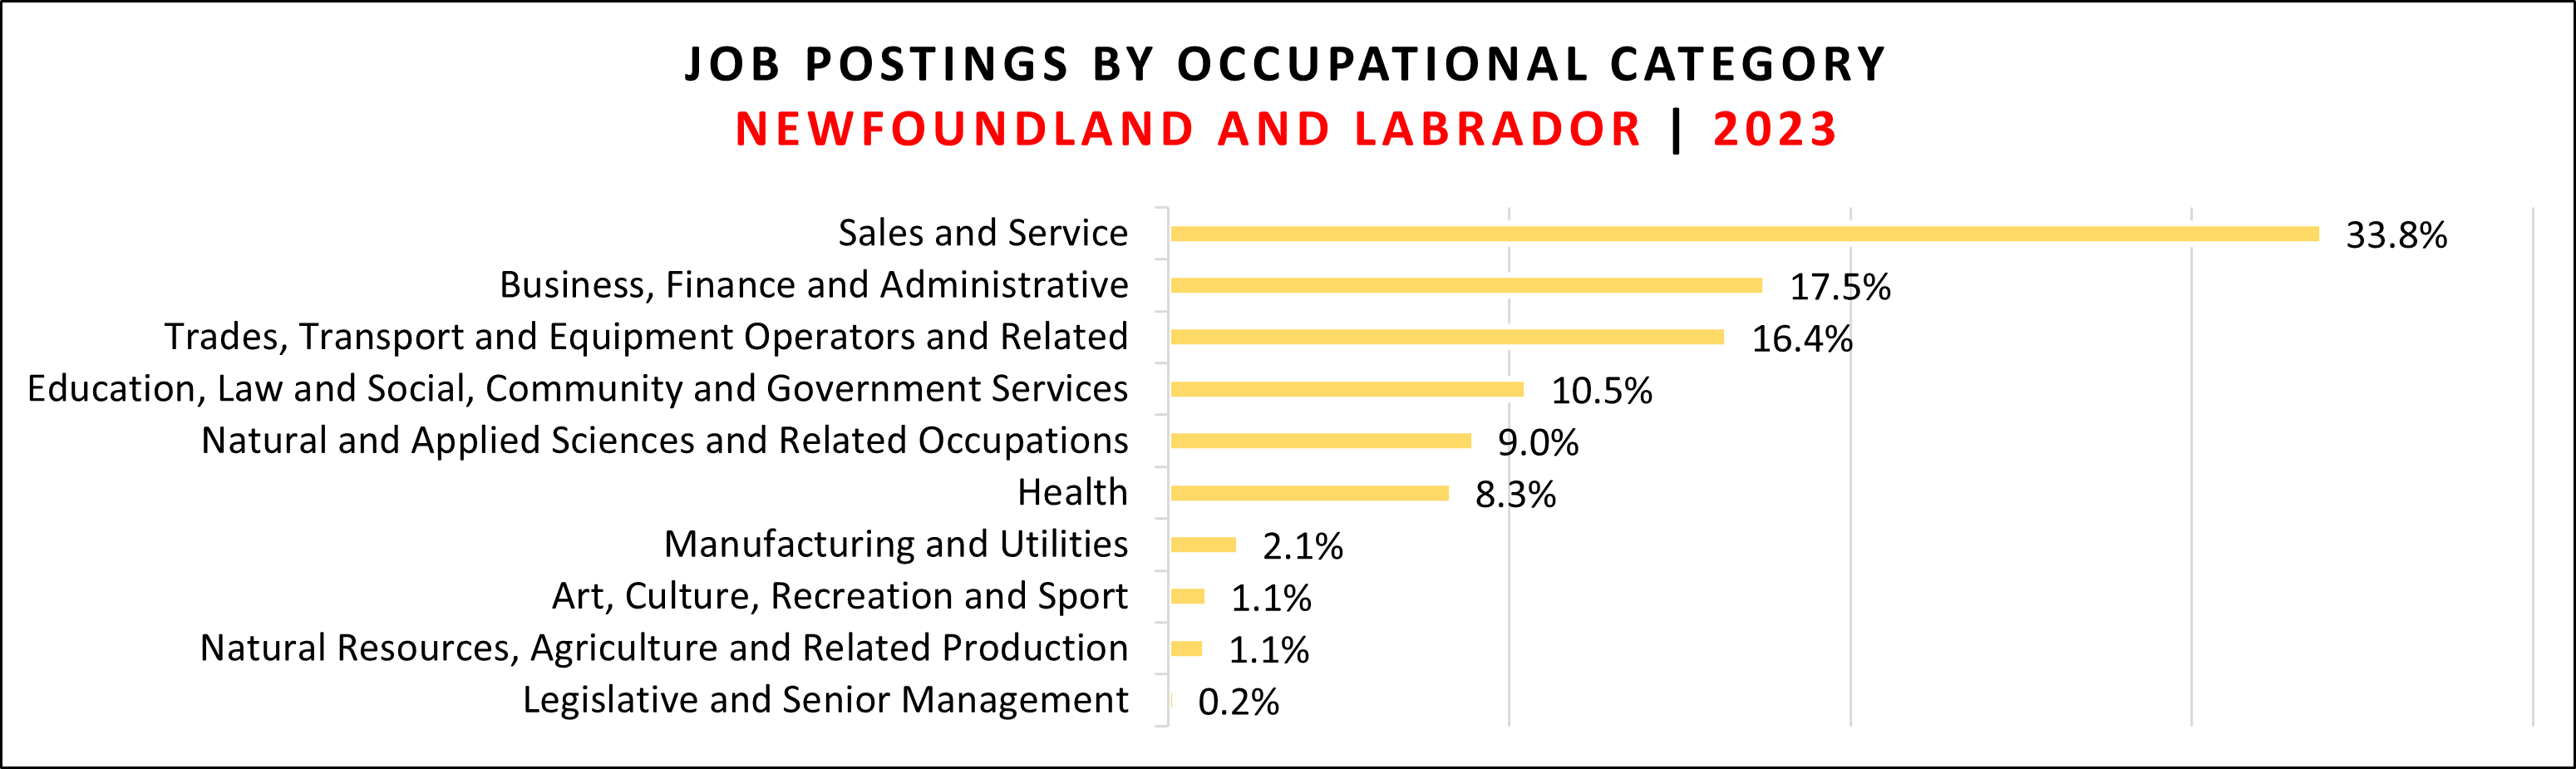 Top occupational categories with job postings in NL for 2023.